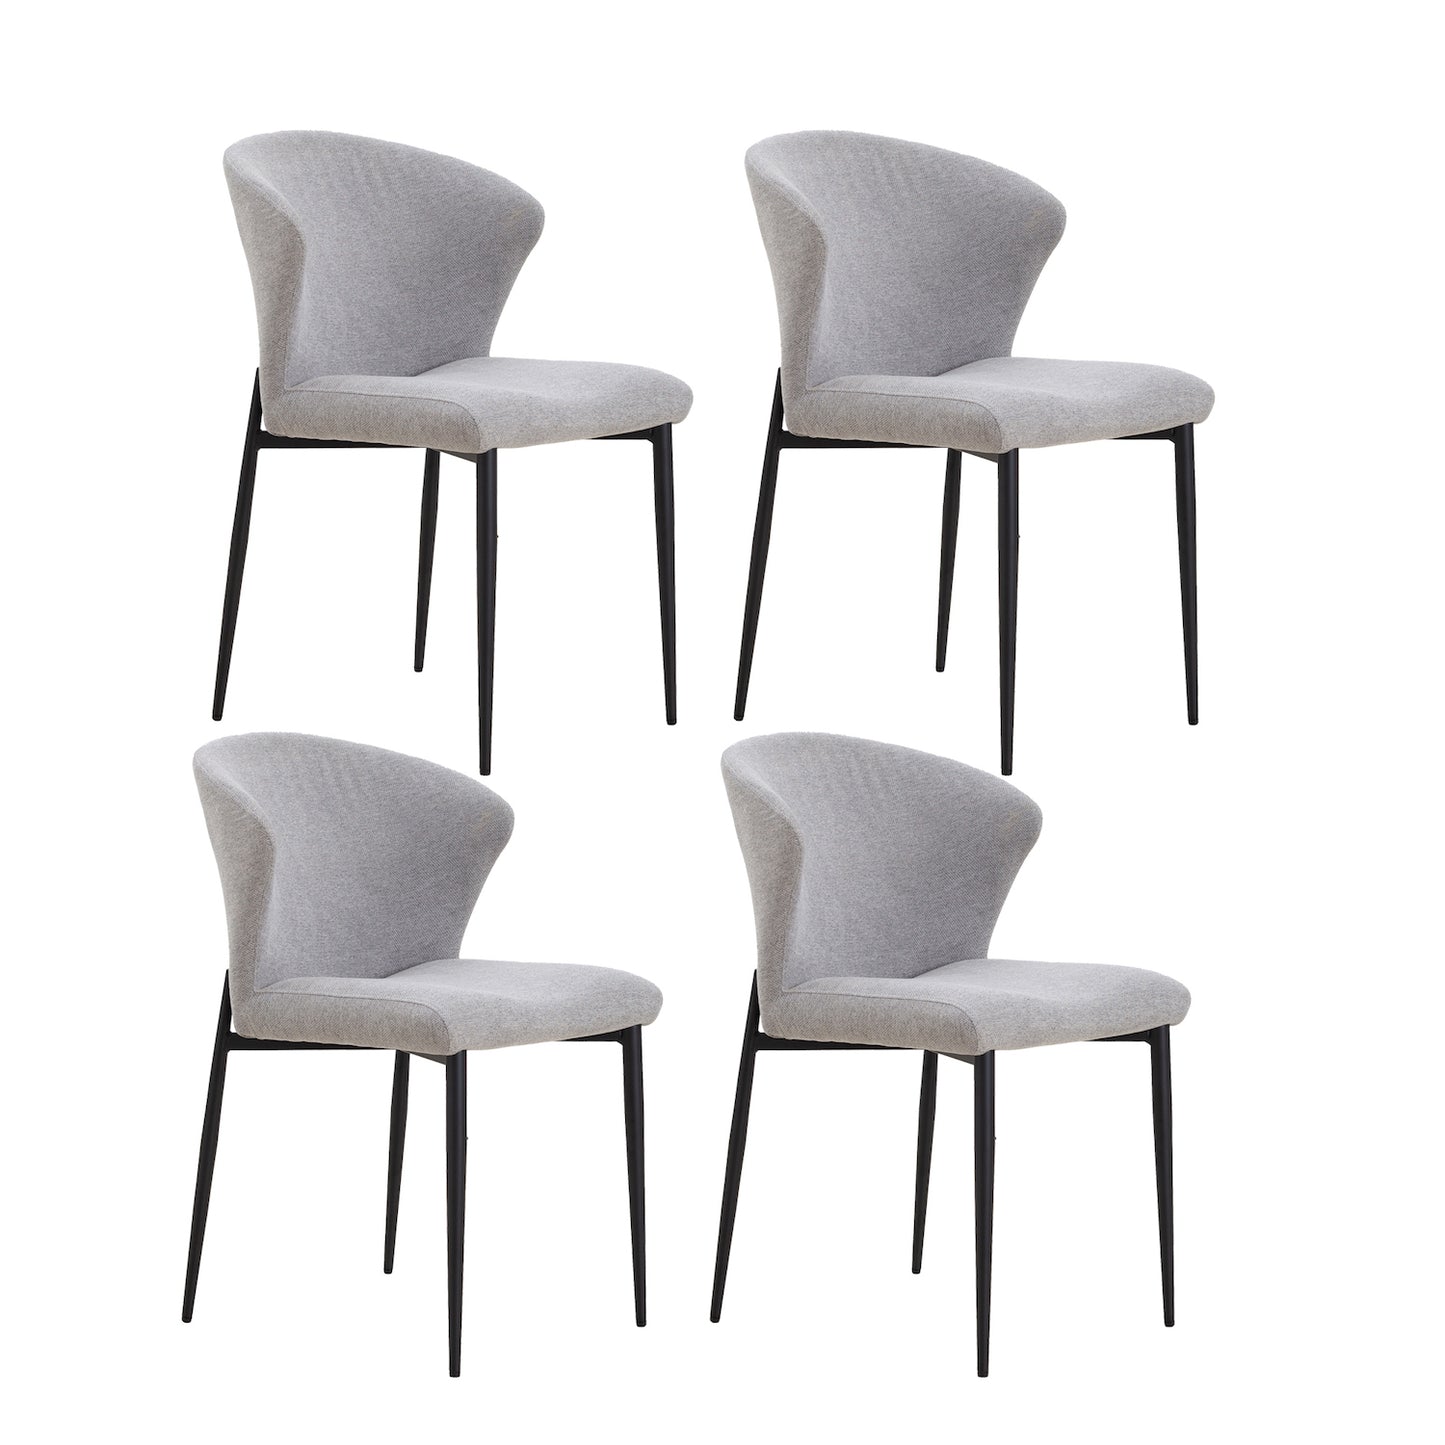 Justone Modern Linen Dining Side Chairs Set of 4 Light Gray